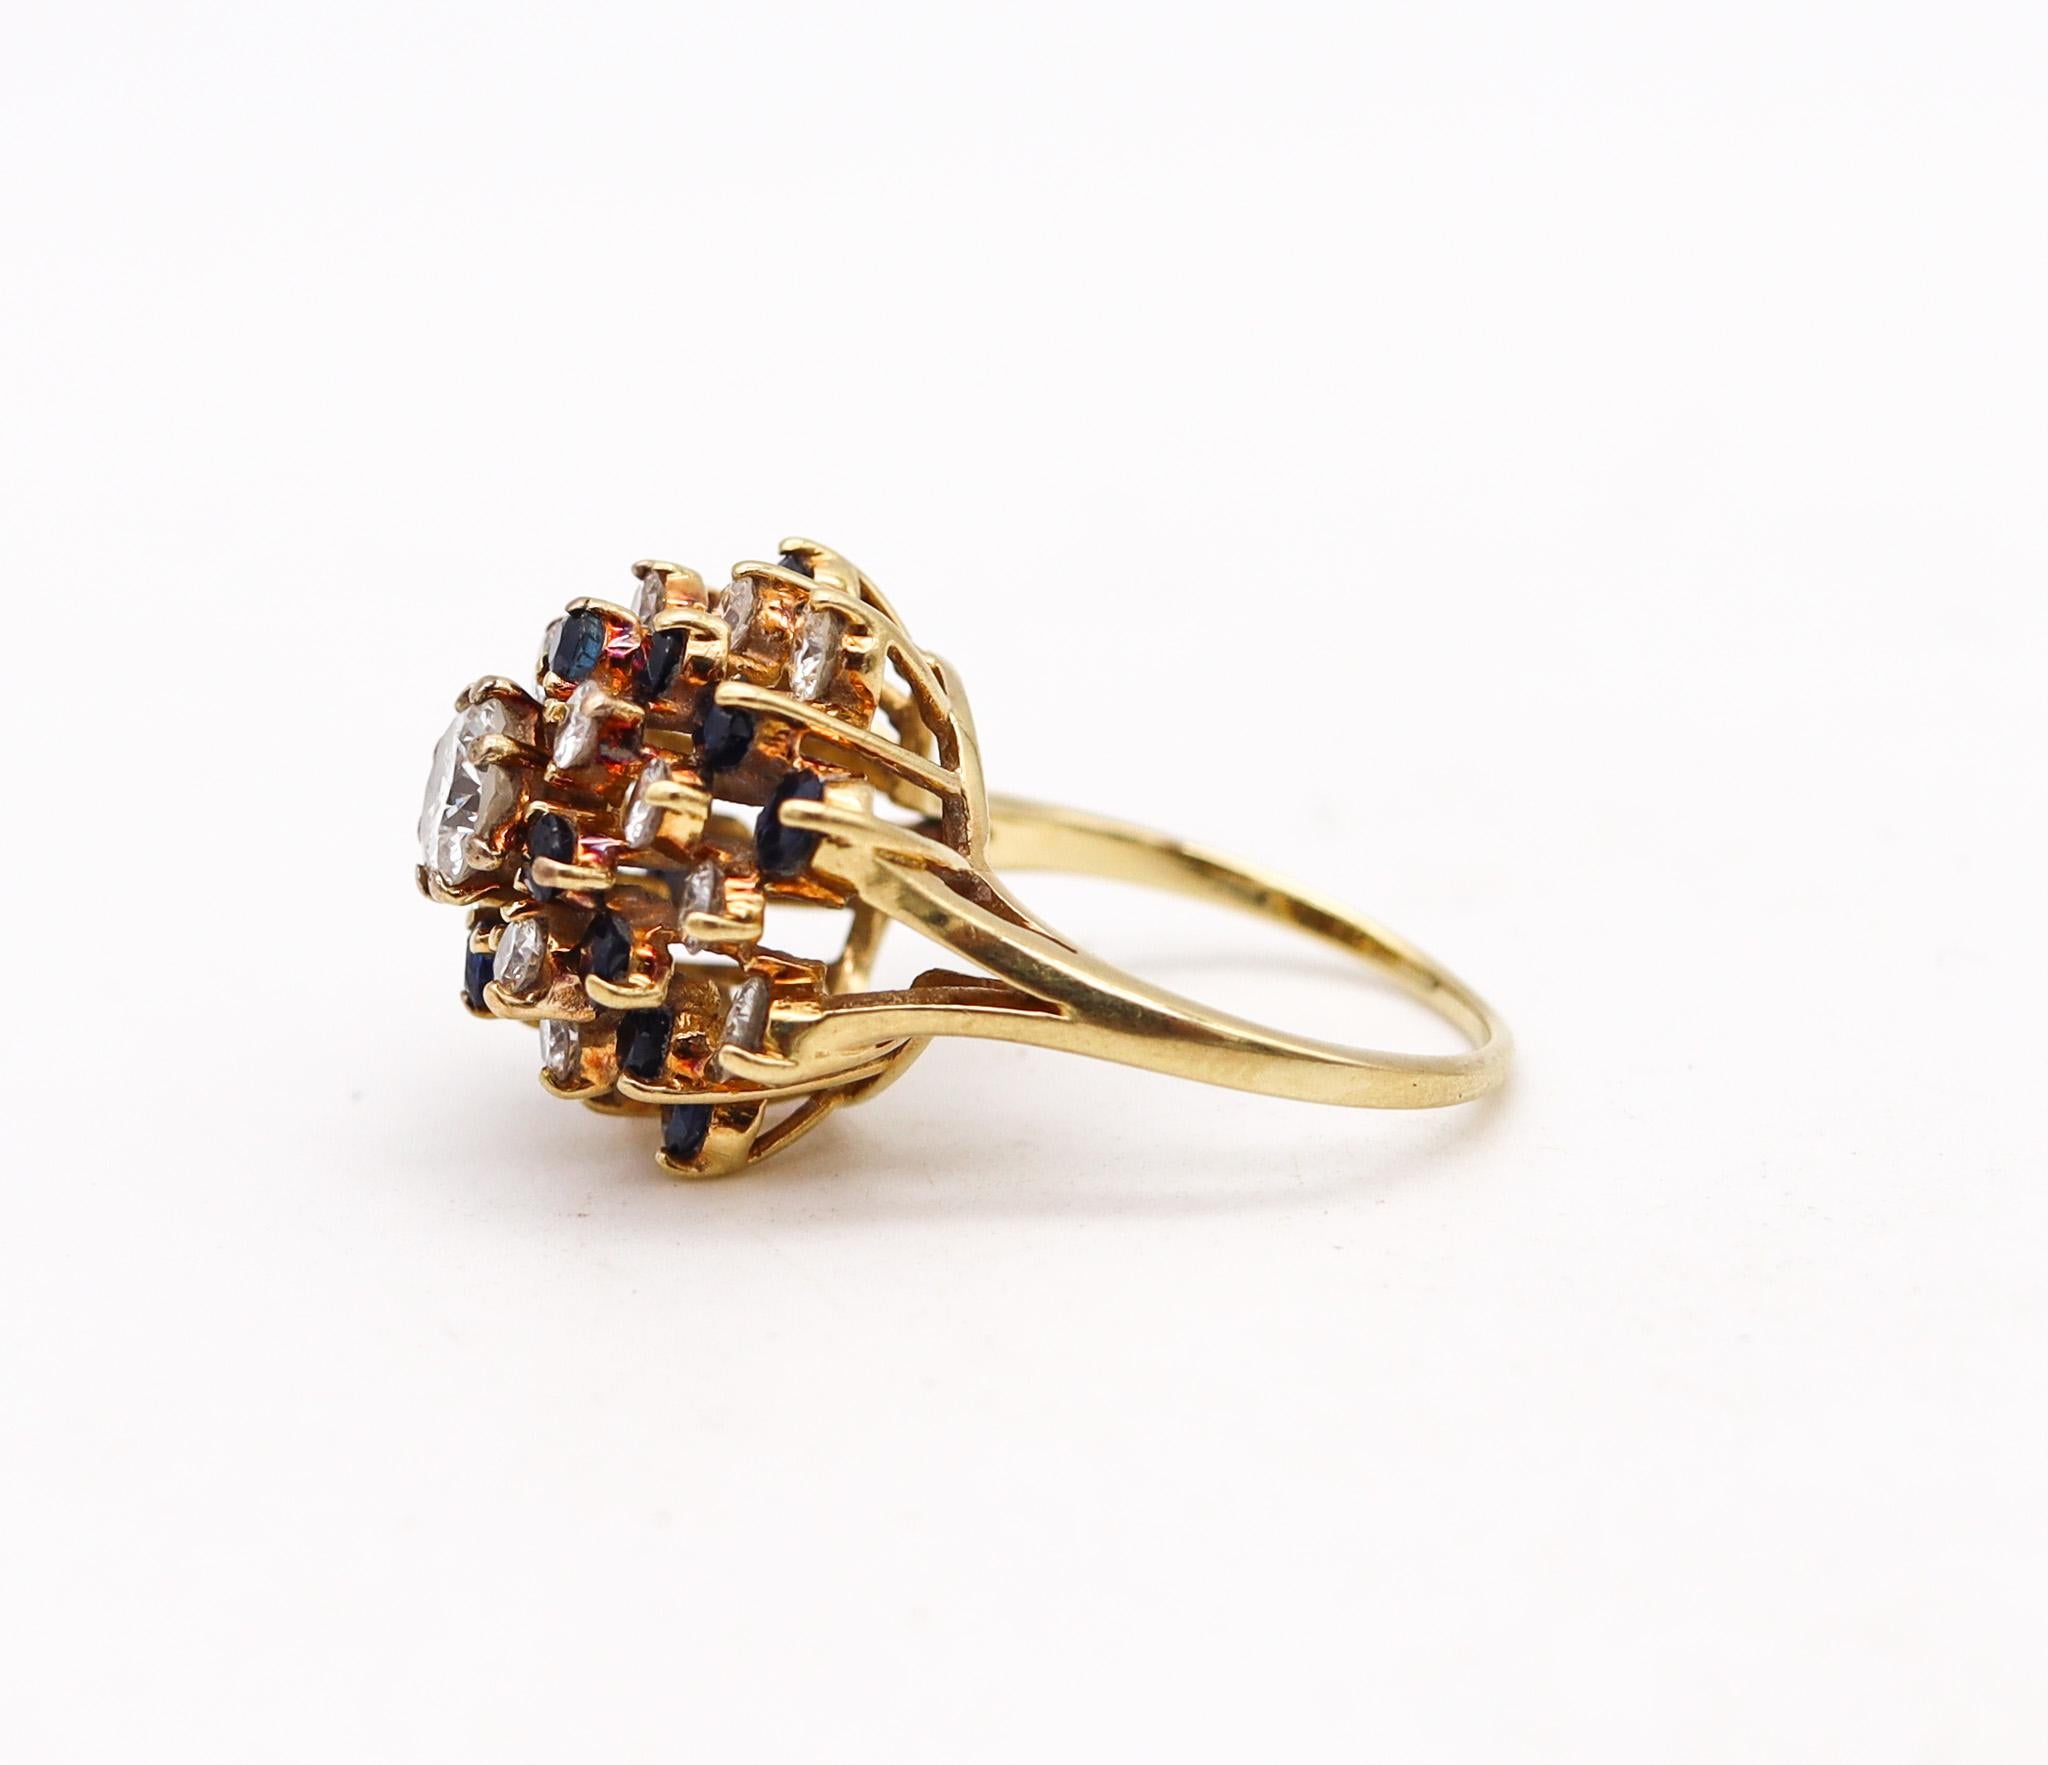 Brilliant Cut Tiffany & Co. Cluster Ring In 18Kt Gold With 2.58 Ctw In Diamonds And Sapphires